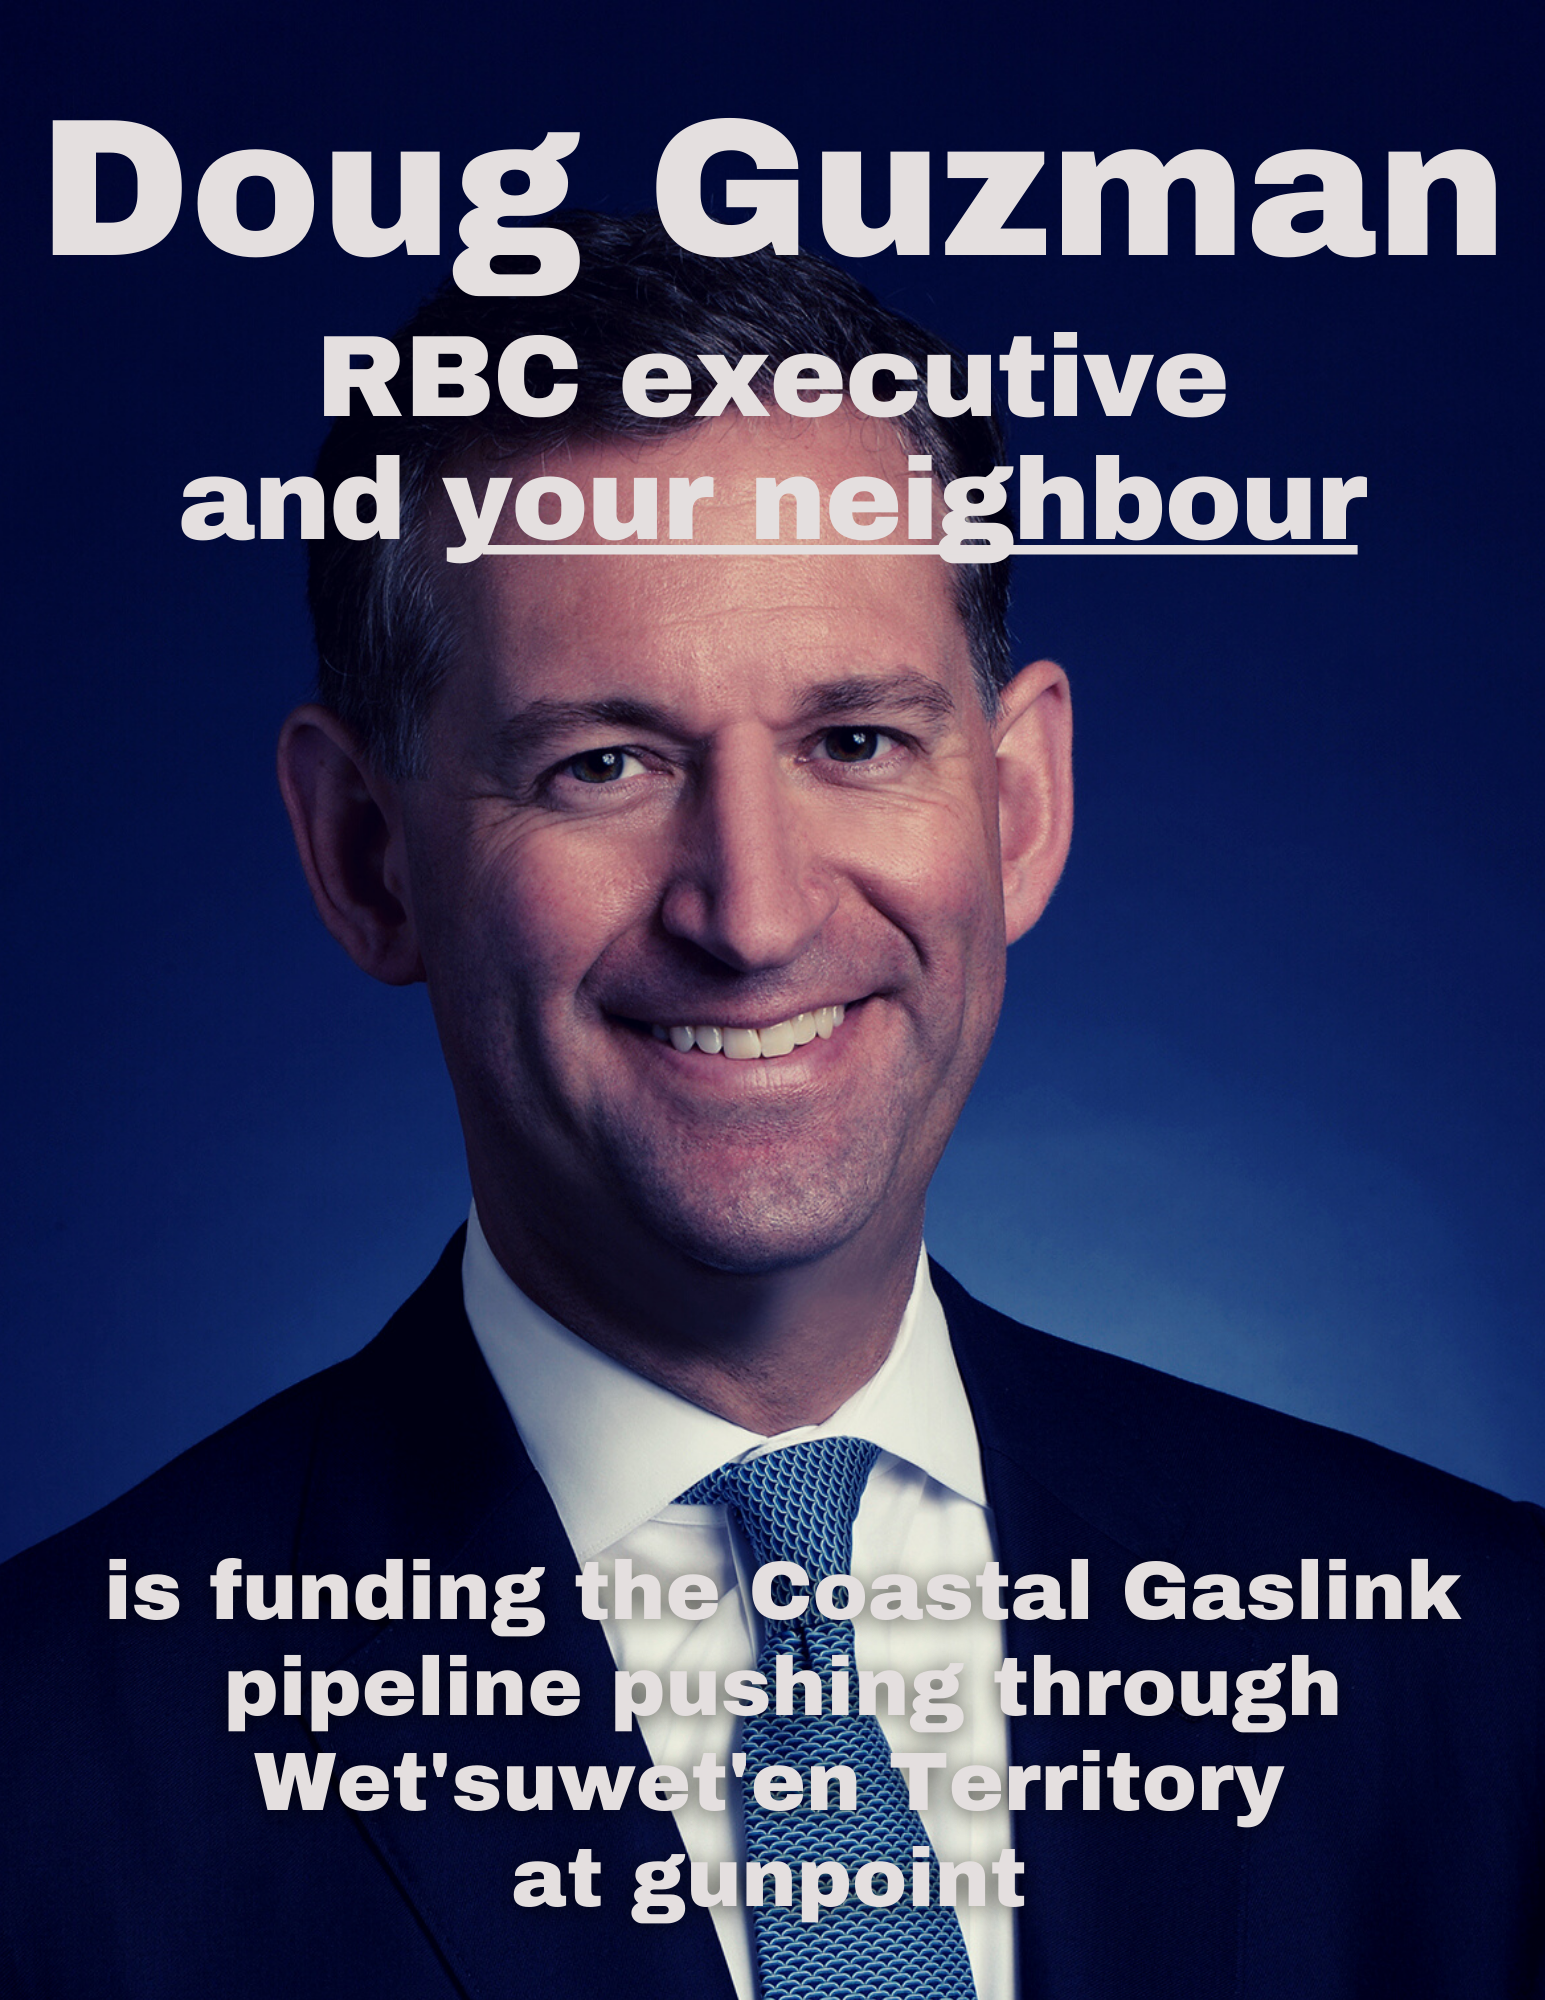 Flyer distributed to Doug Guzman's neighbours. It is a photo of him with text reading "Doug Guzman, RBC executive and your neighbour is pushing the Coastal GasLink pipeline through Wet'suwet'en Territory at gunpoint." Image courtesy of World BEYOND War Canada 